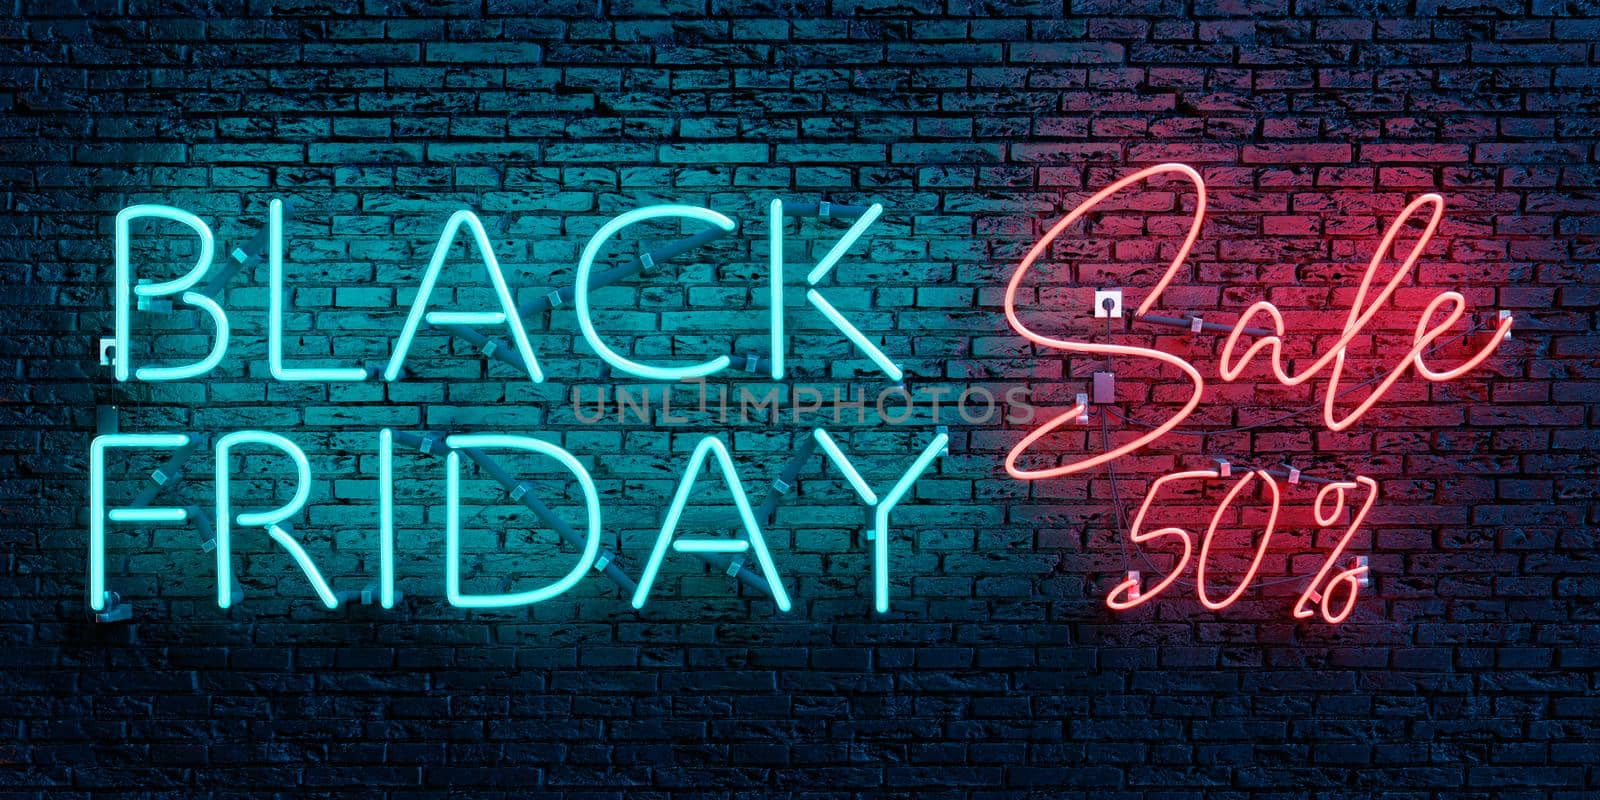 BLACK FRIDAY SALE 50 percent neon sign on brick wall. 3d rendering